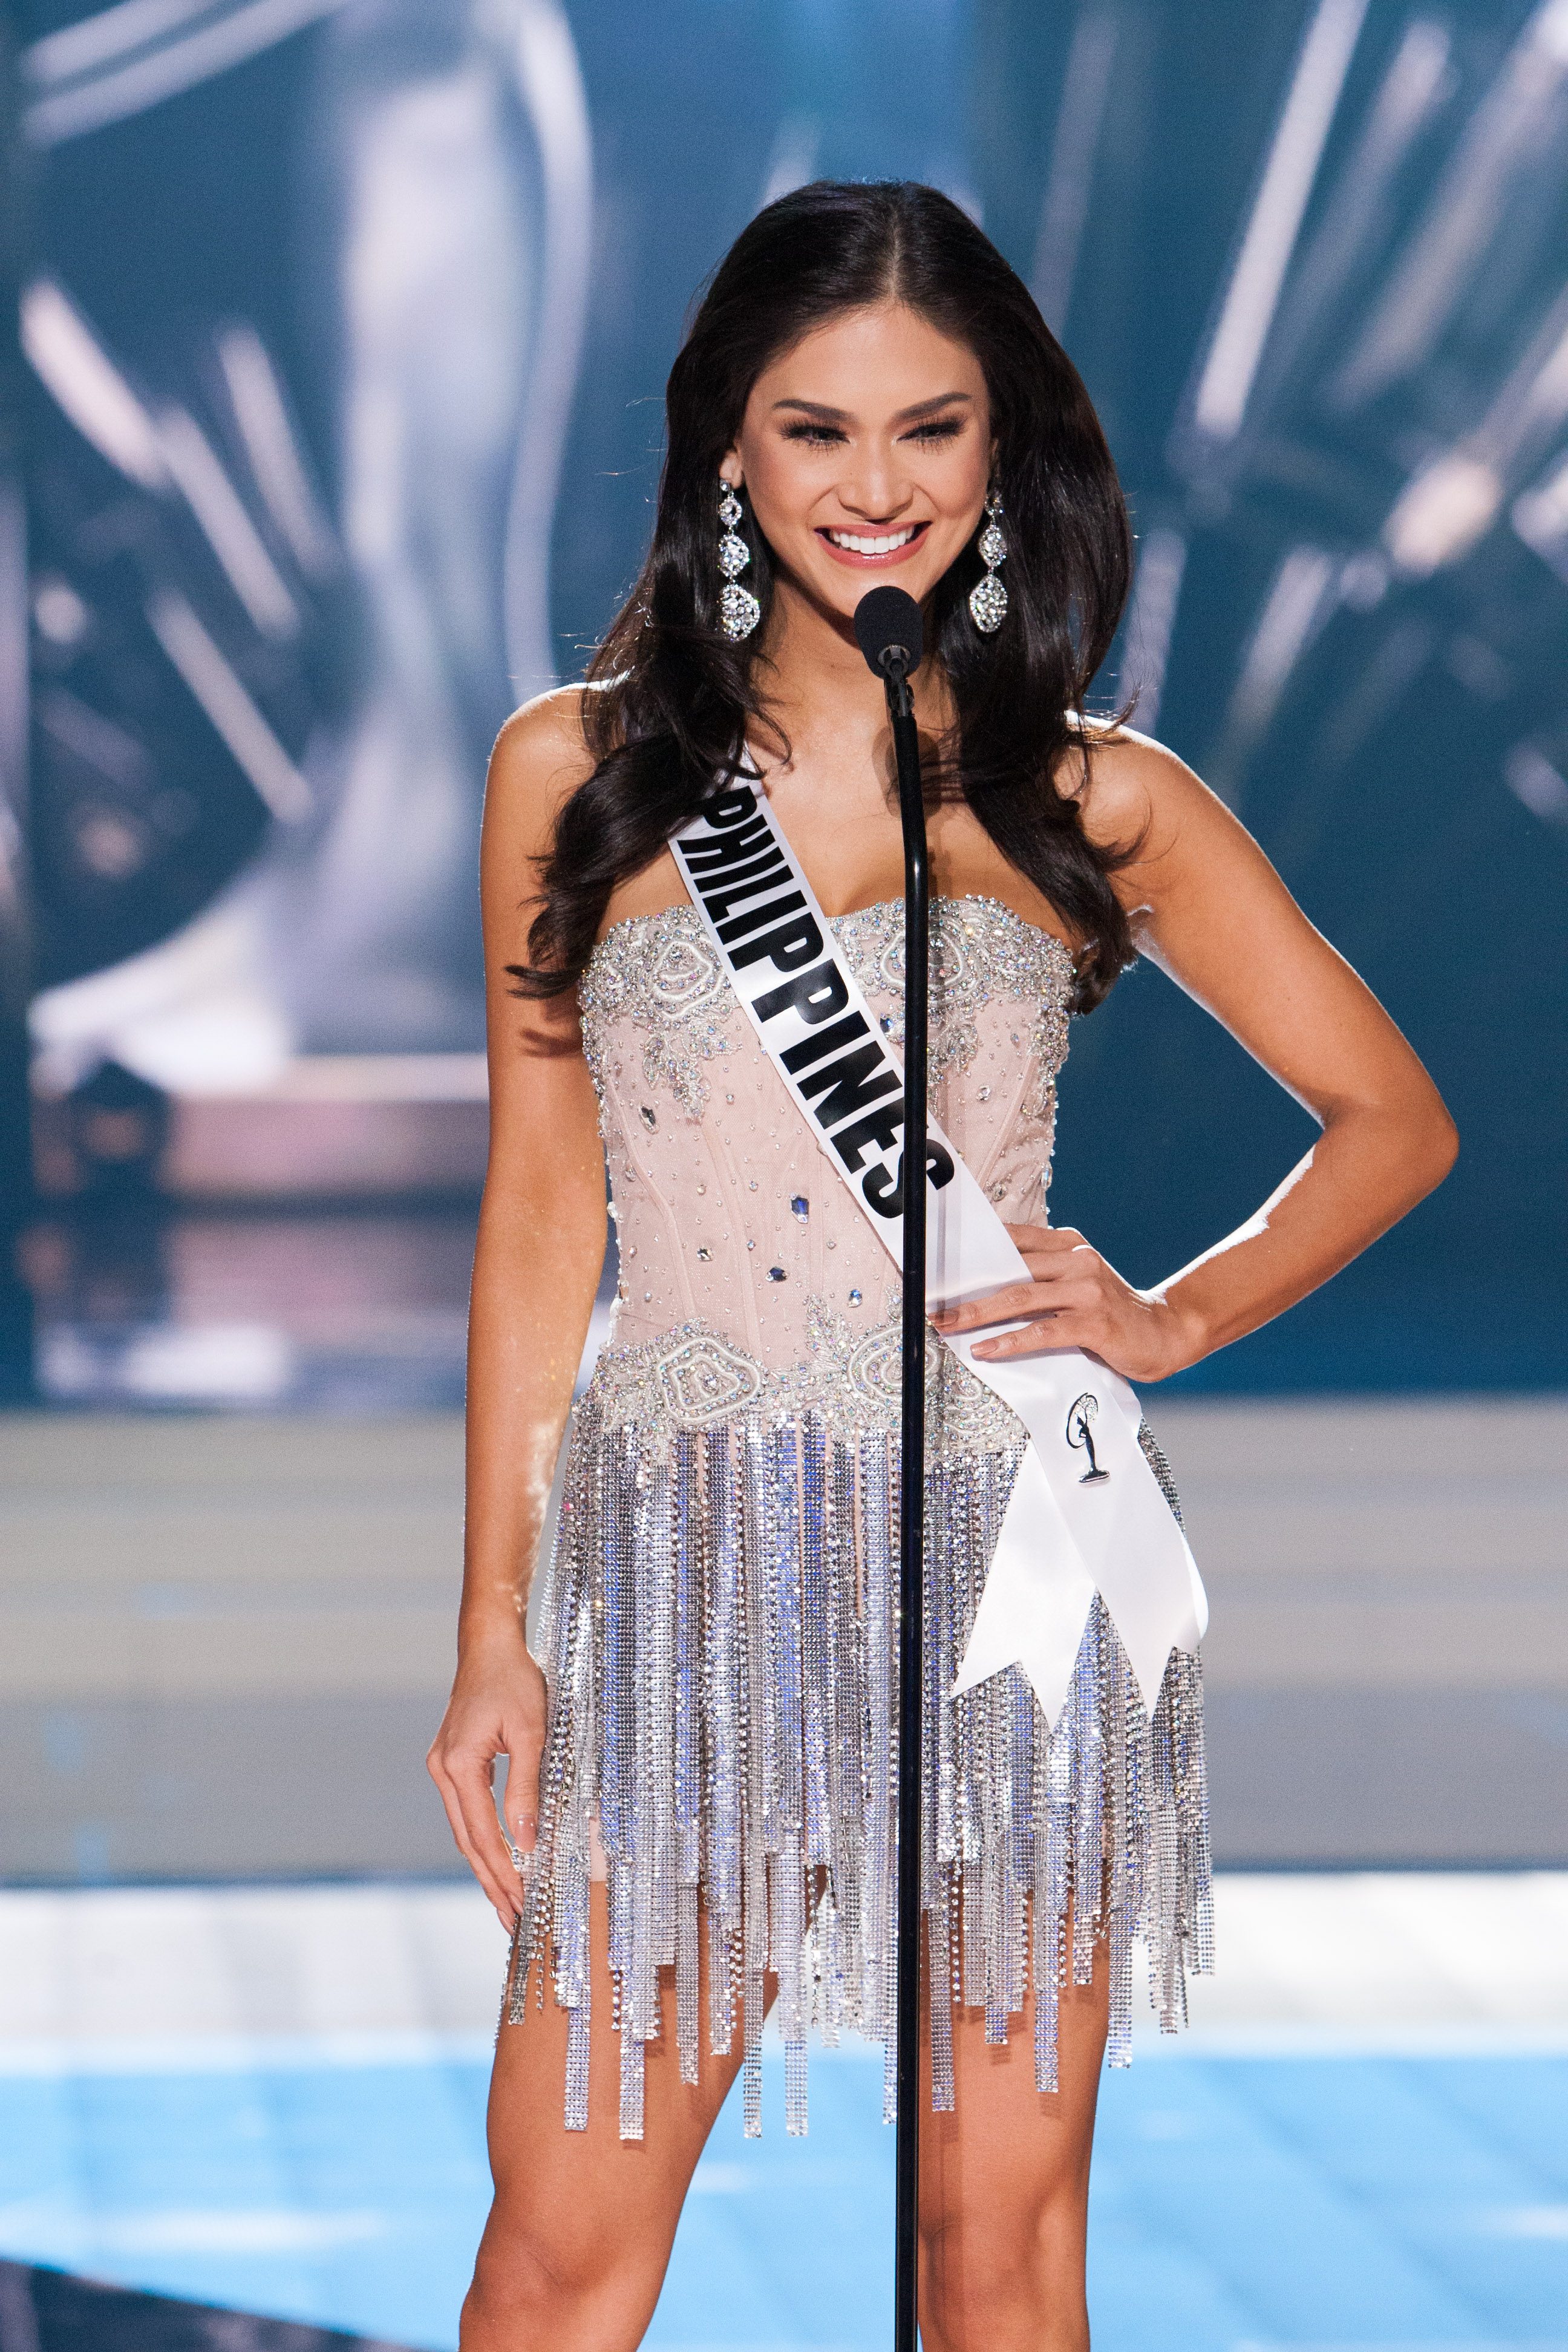 Pia Alonzo Wurtzbach, Miss Philippines 2015 on stage in fashion by Sherri Hill during the opening of The 2015 MISS UNIVERSE® Preliminary Show at Planet Hollywood Resort & Casino Wednesday, December 16, 2015.  Photo courtesy of HO/The Miss Universe Organization 